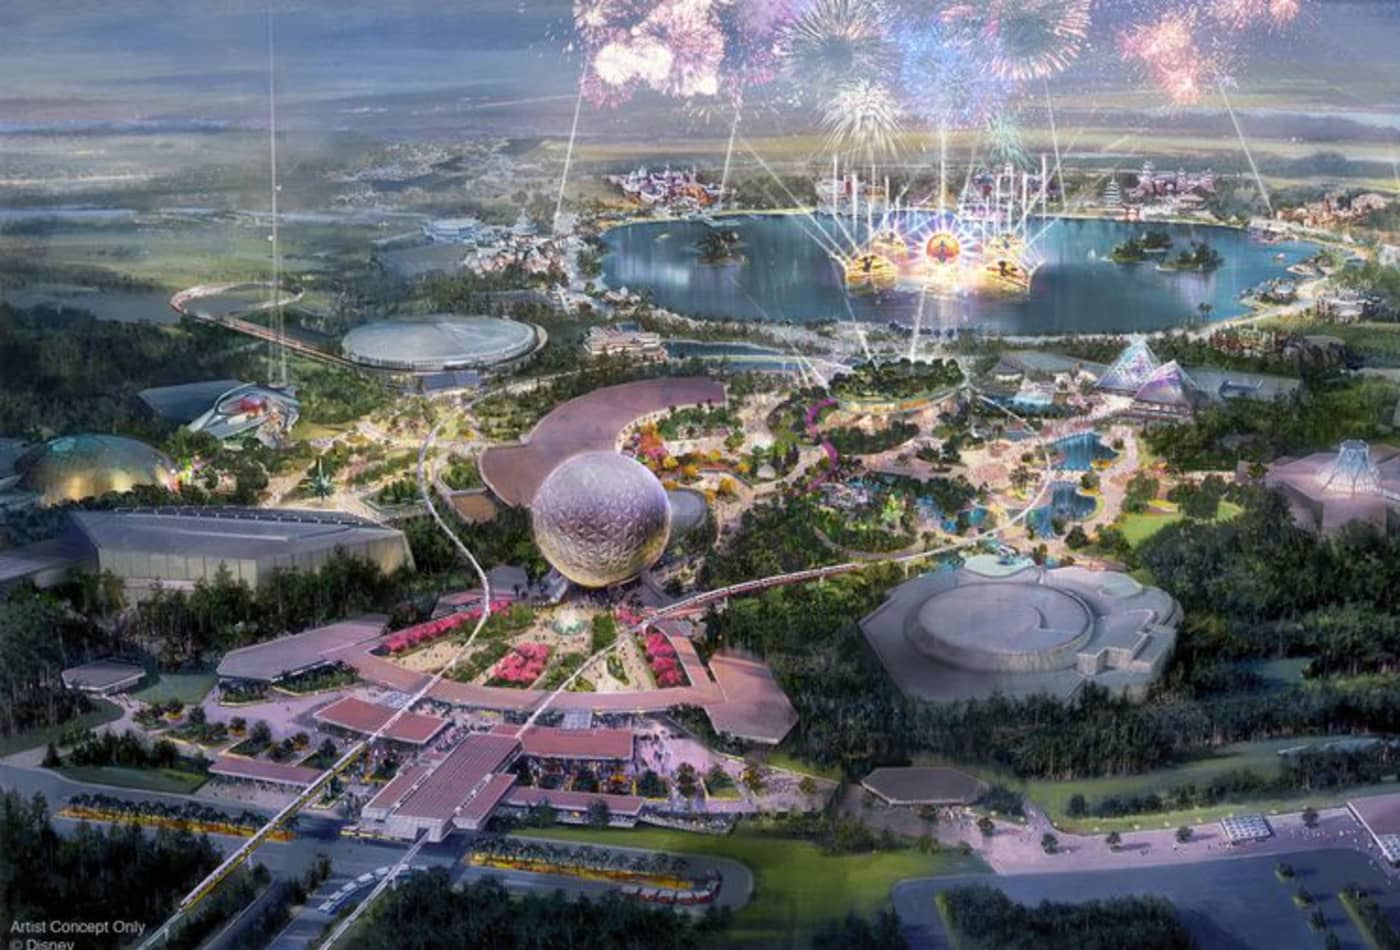 Pictures: Inside Disney's Epcot overhaul with new rides, attractions